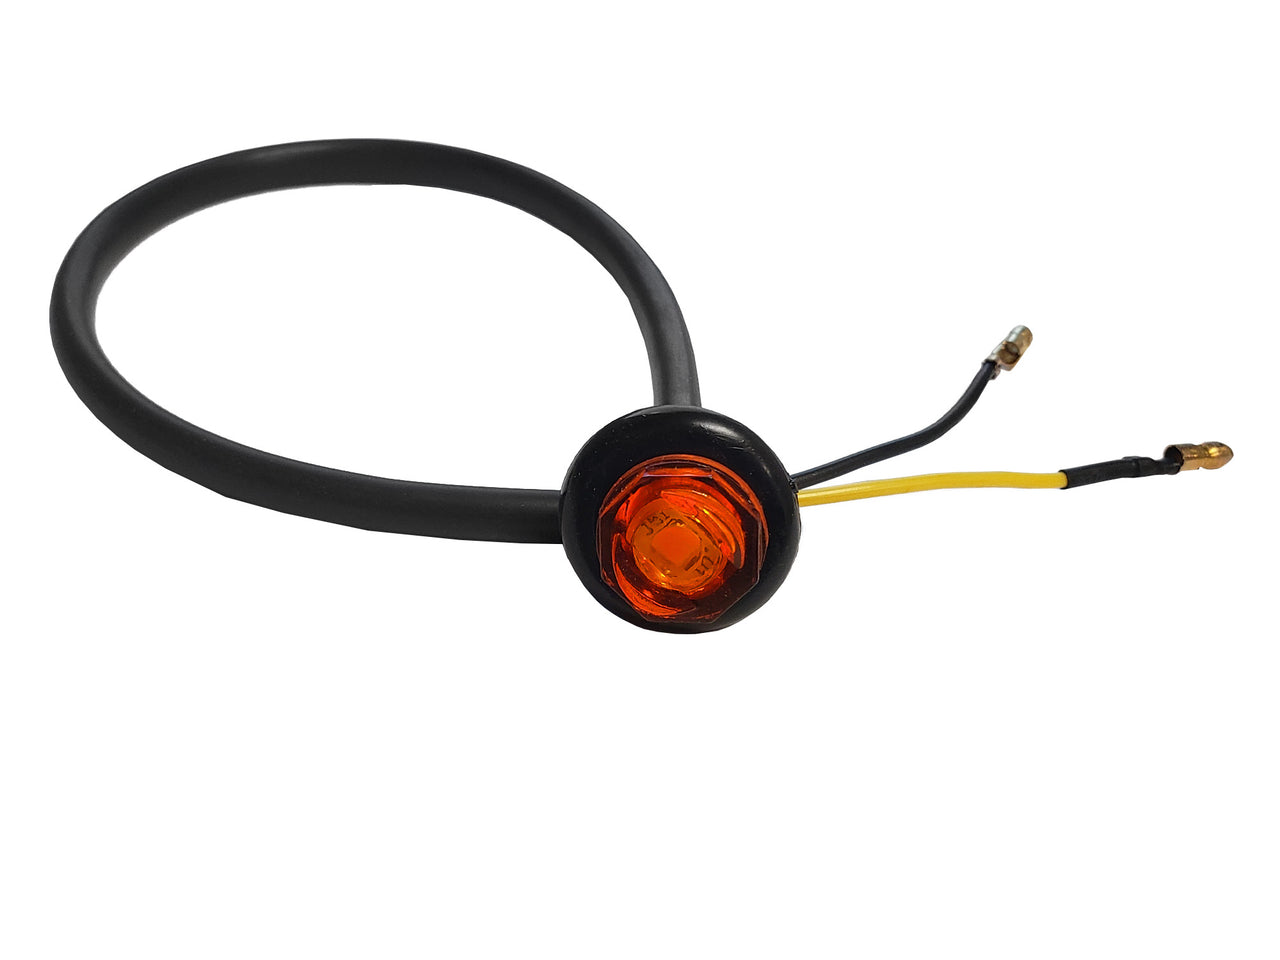 3/4" Round Amber / Orange clearance bullet light with grommet. 6" of black wire protector over 8" of wire. 1 Black, one yellow wire.